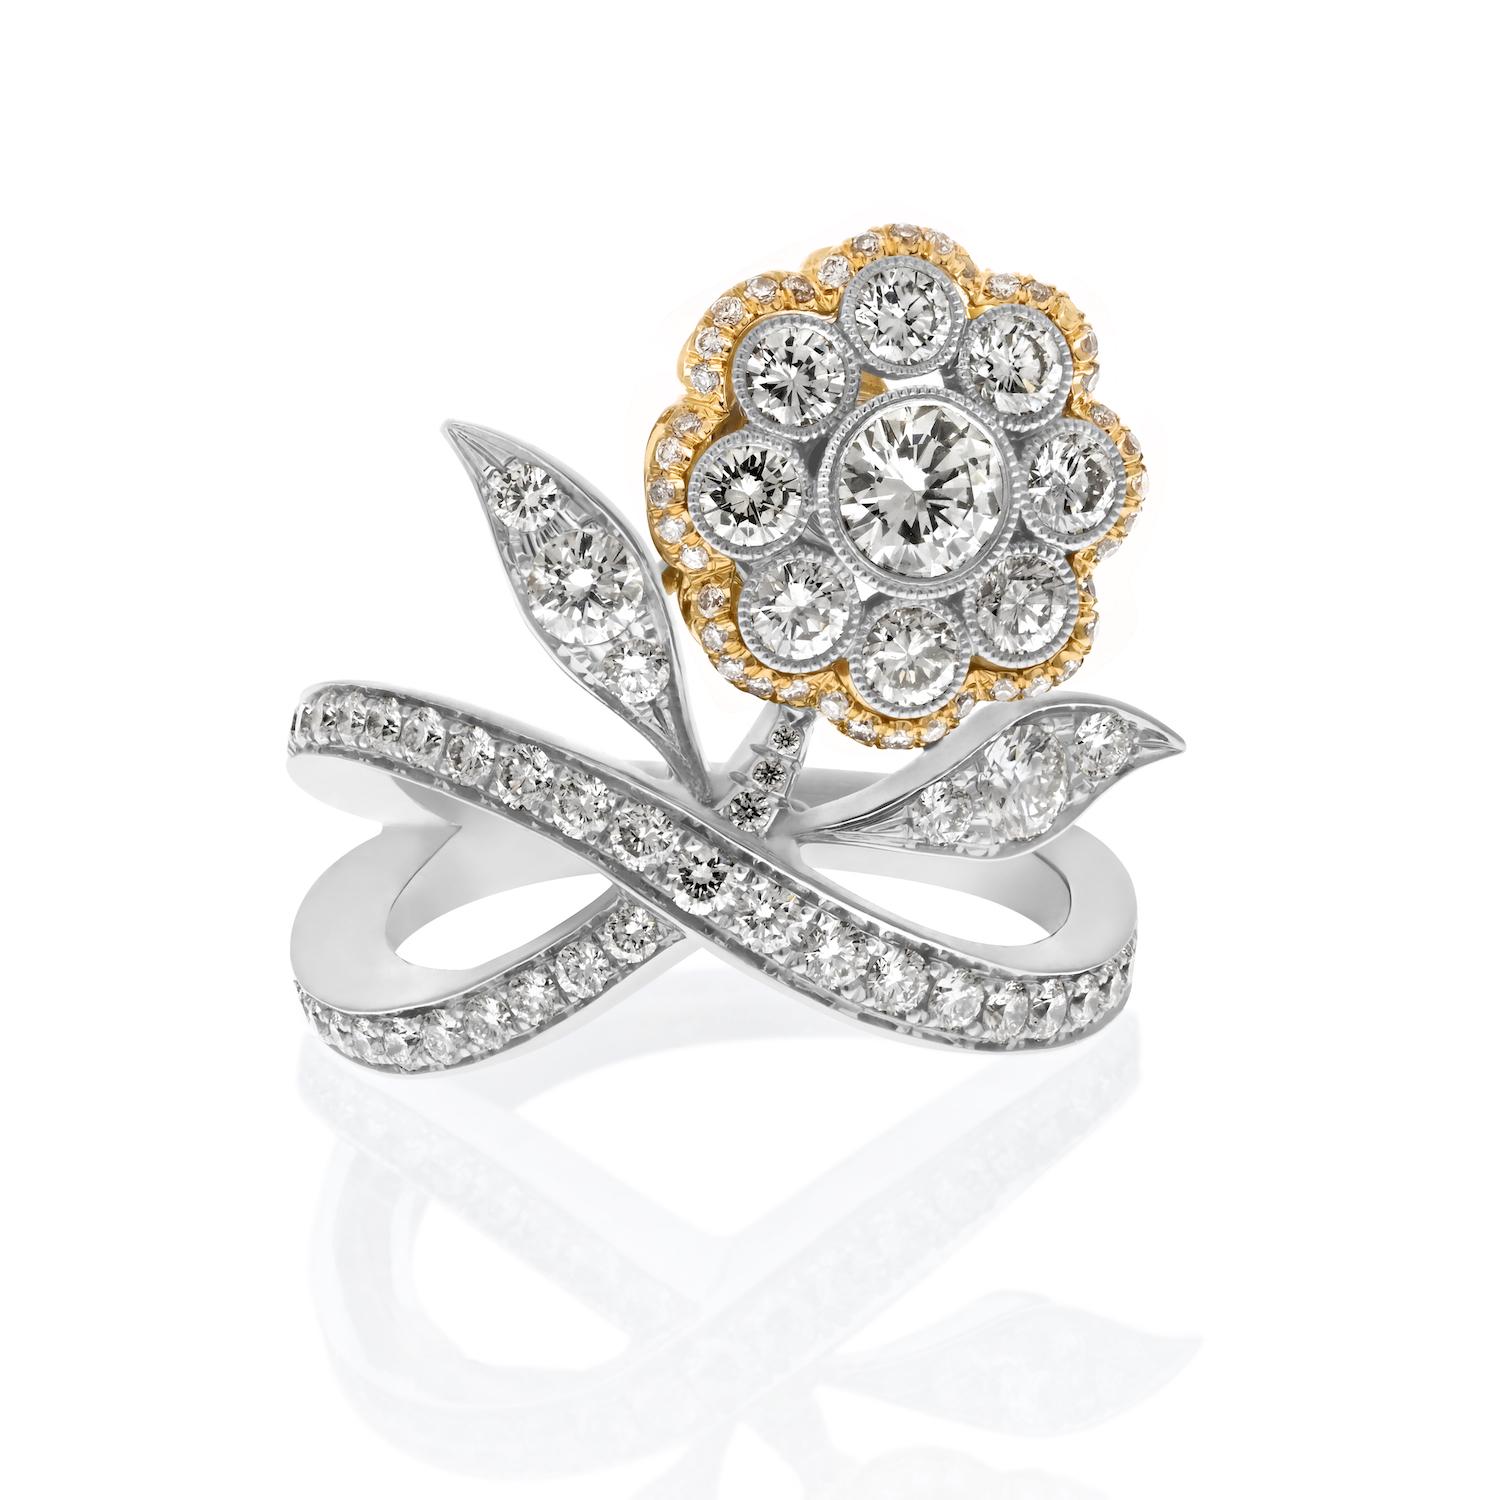 Exquisite Handcrafted Flower Ring: Your Timeless Companion.

Step into a world of timeless elegance with this handcrafted flower ring, where nature's beauty and masterful craftsmanship unite to create a piece that can grace your hand as a playful